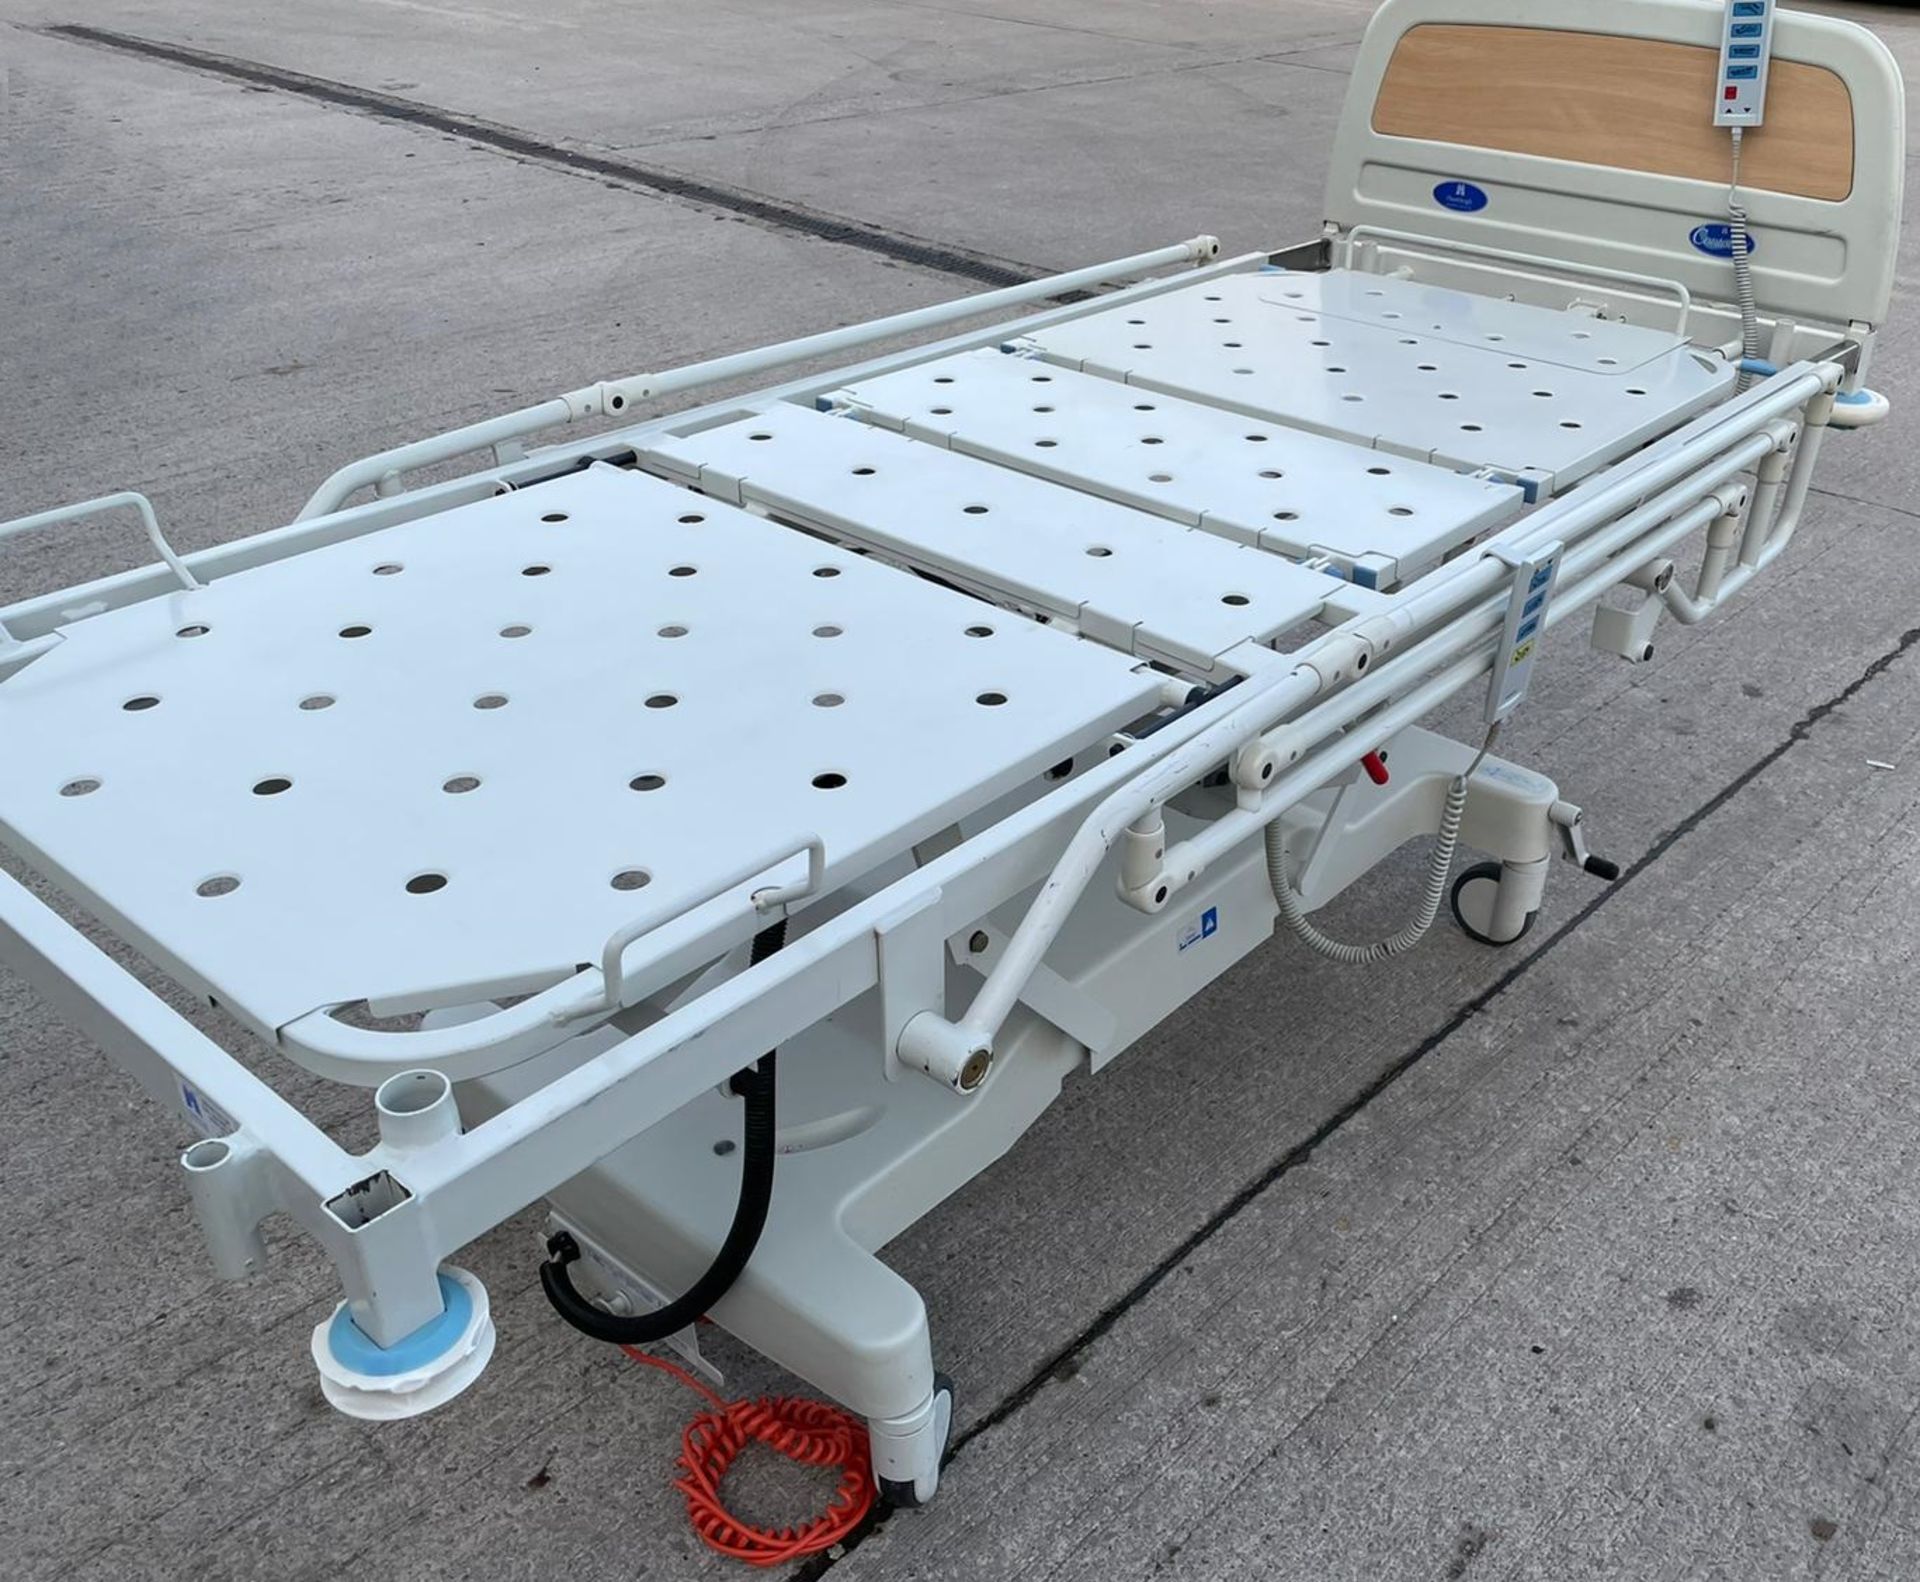 1 x Huntleigh CONTOURA Electric Hospital Bed - Features Rise/Fall 3-Way Profiling, Side Rails, - Image 2 of 8